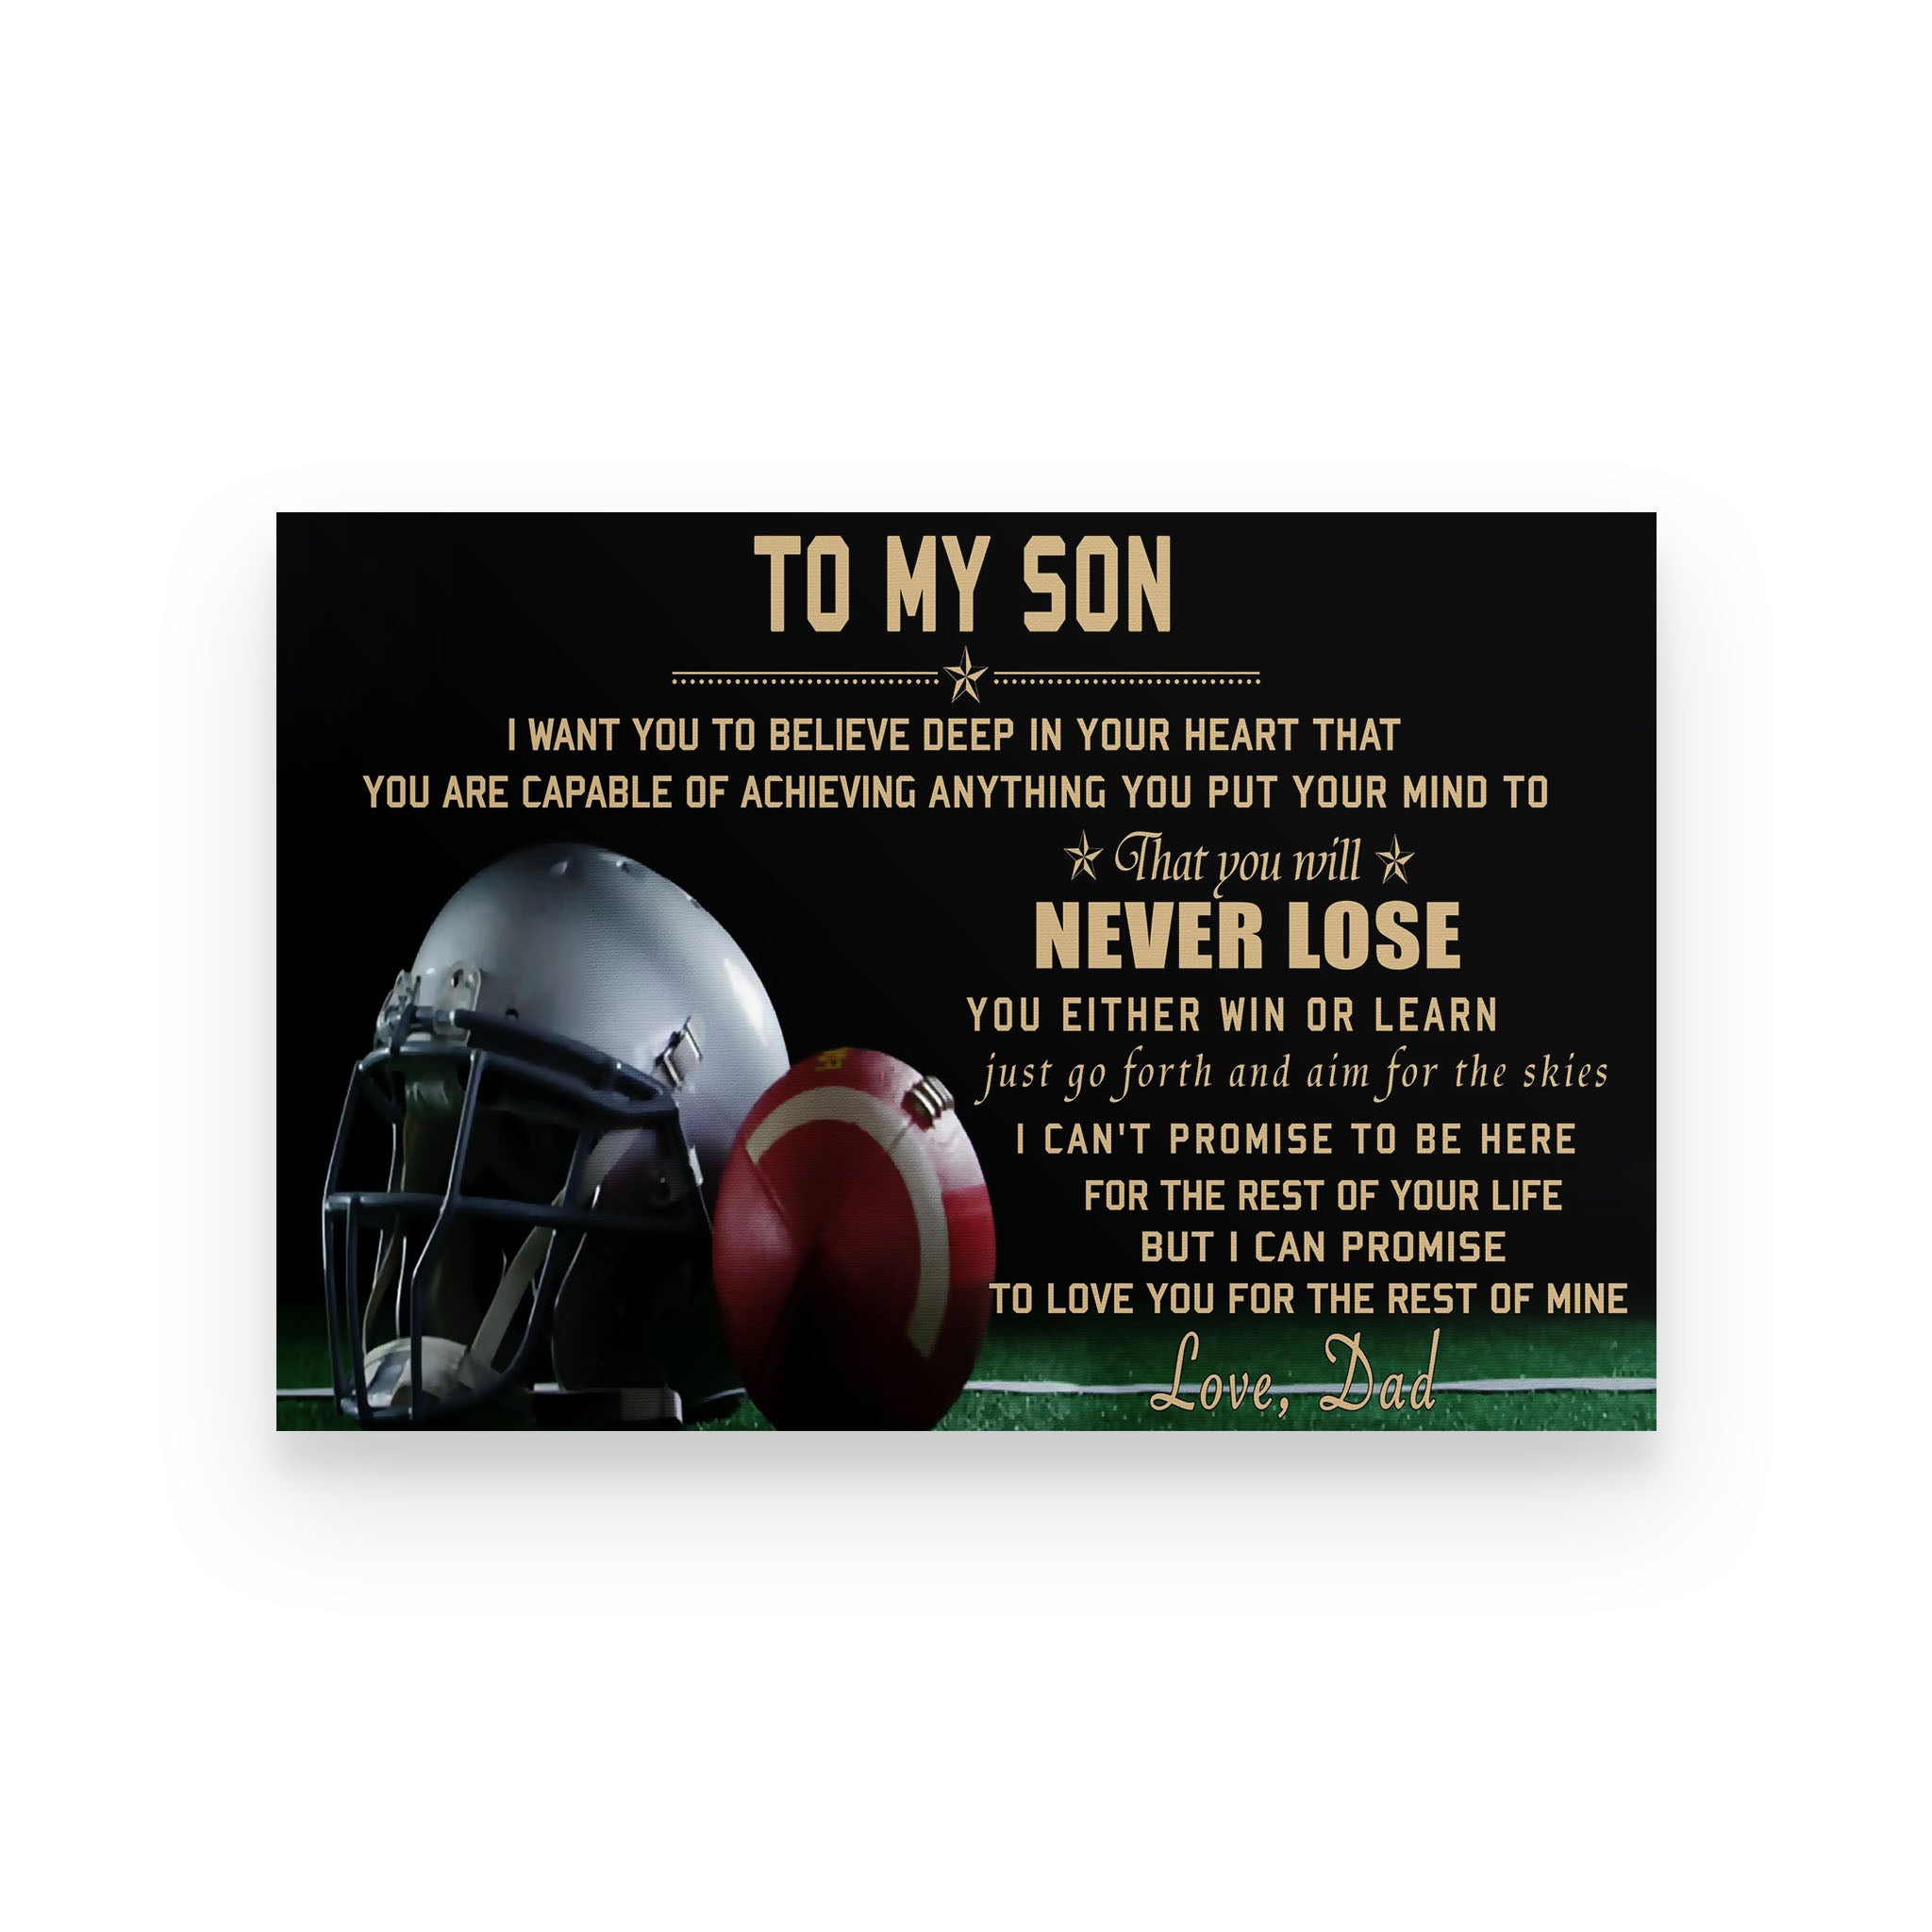 American football poster Dad to son I want you to believe deep in your heart that you are capable of achieving anything you put your mind to that you will never lose